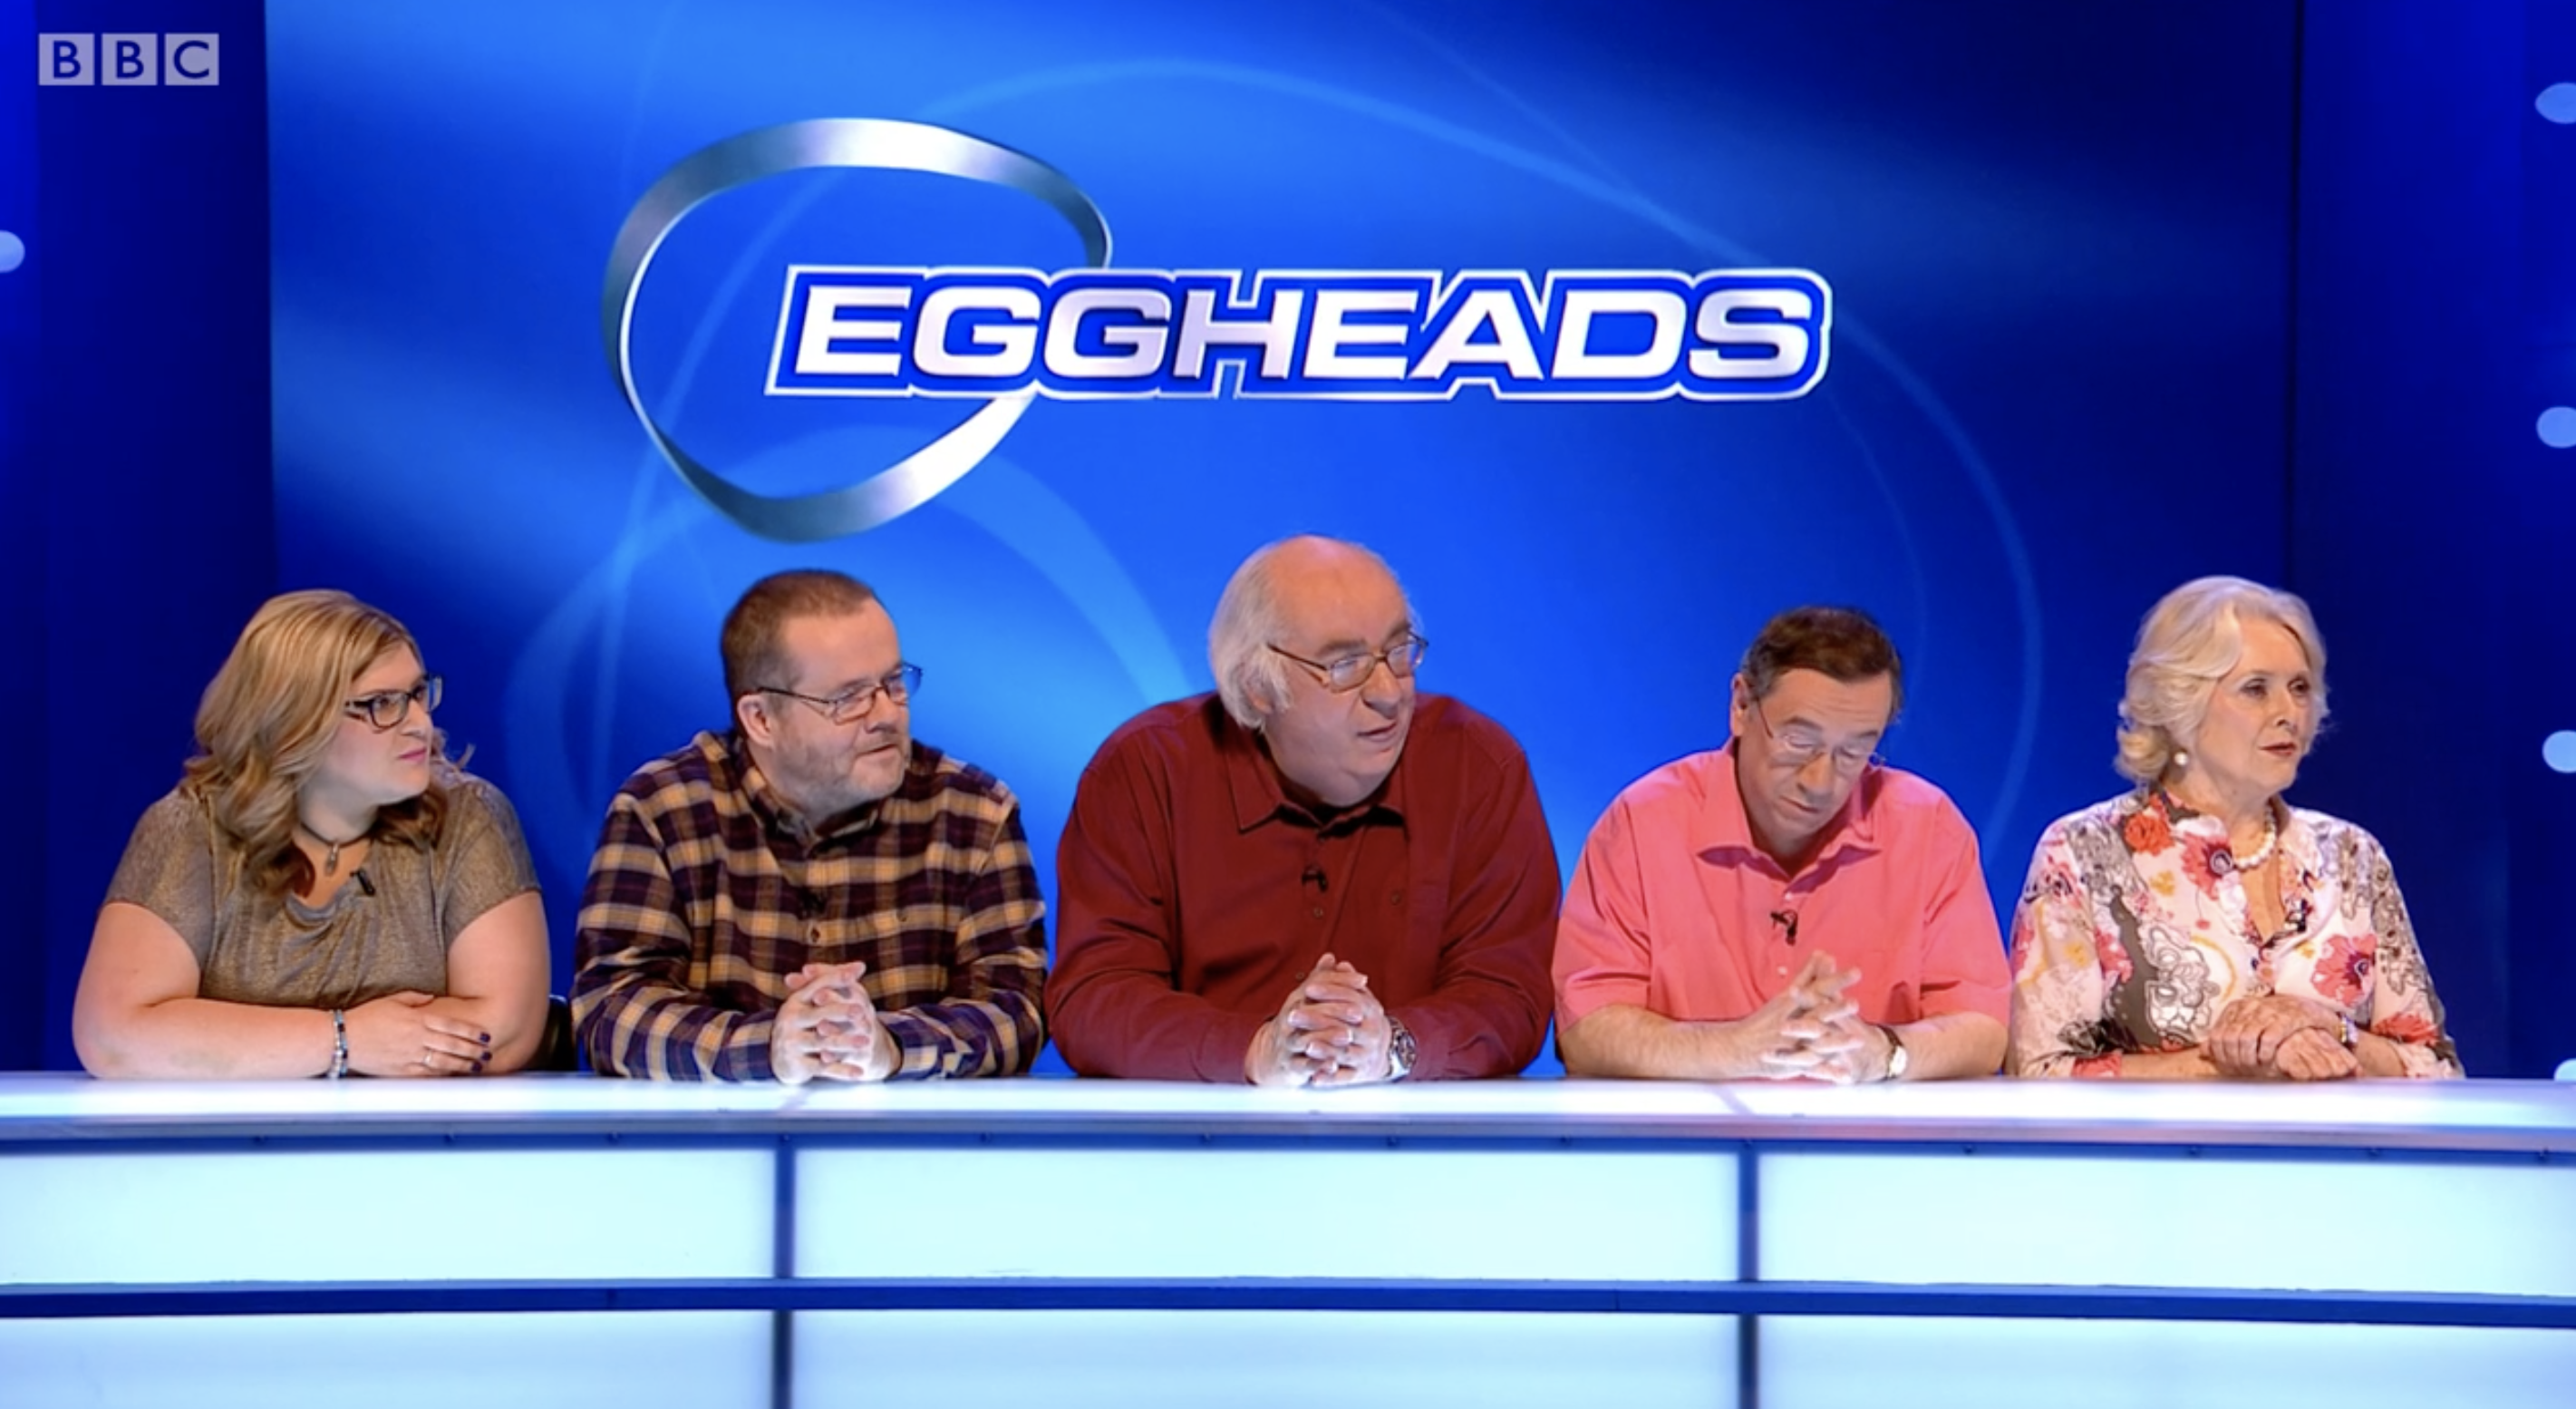 What has happened to Eggheads? BBC quiz series missing from air